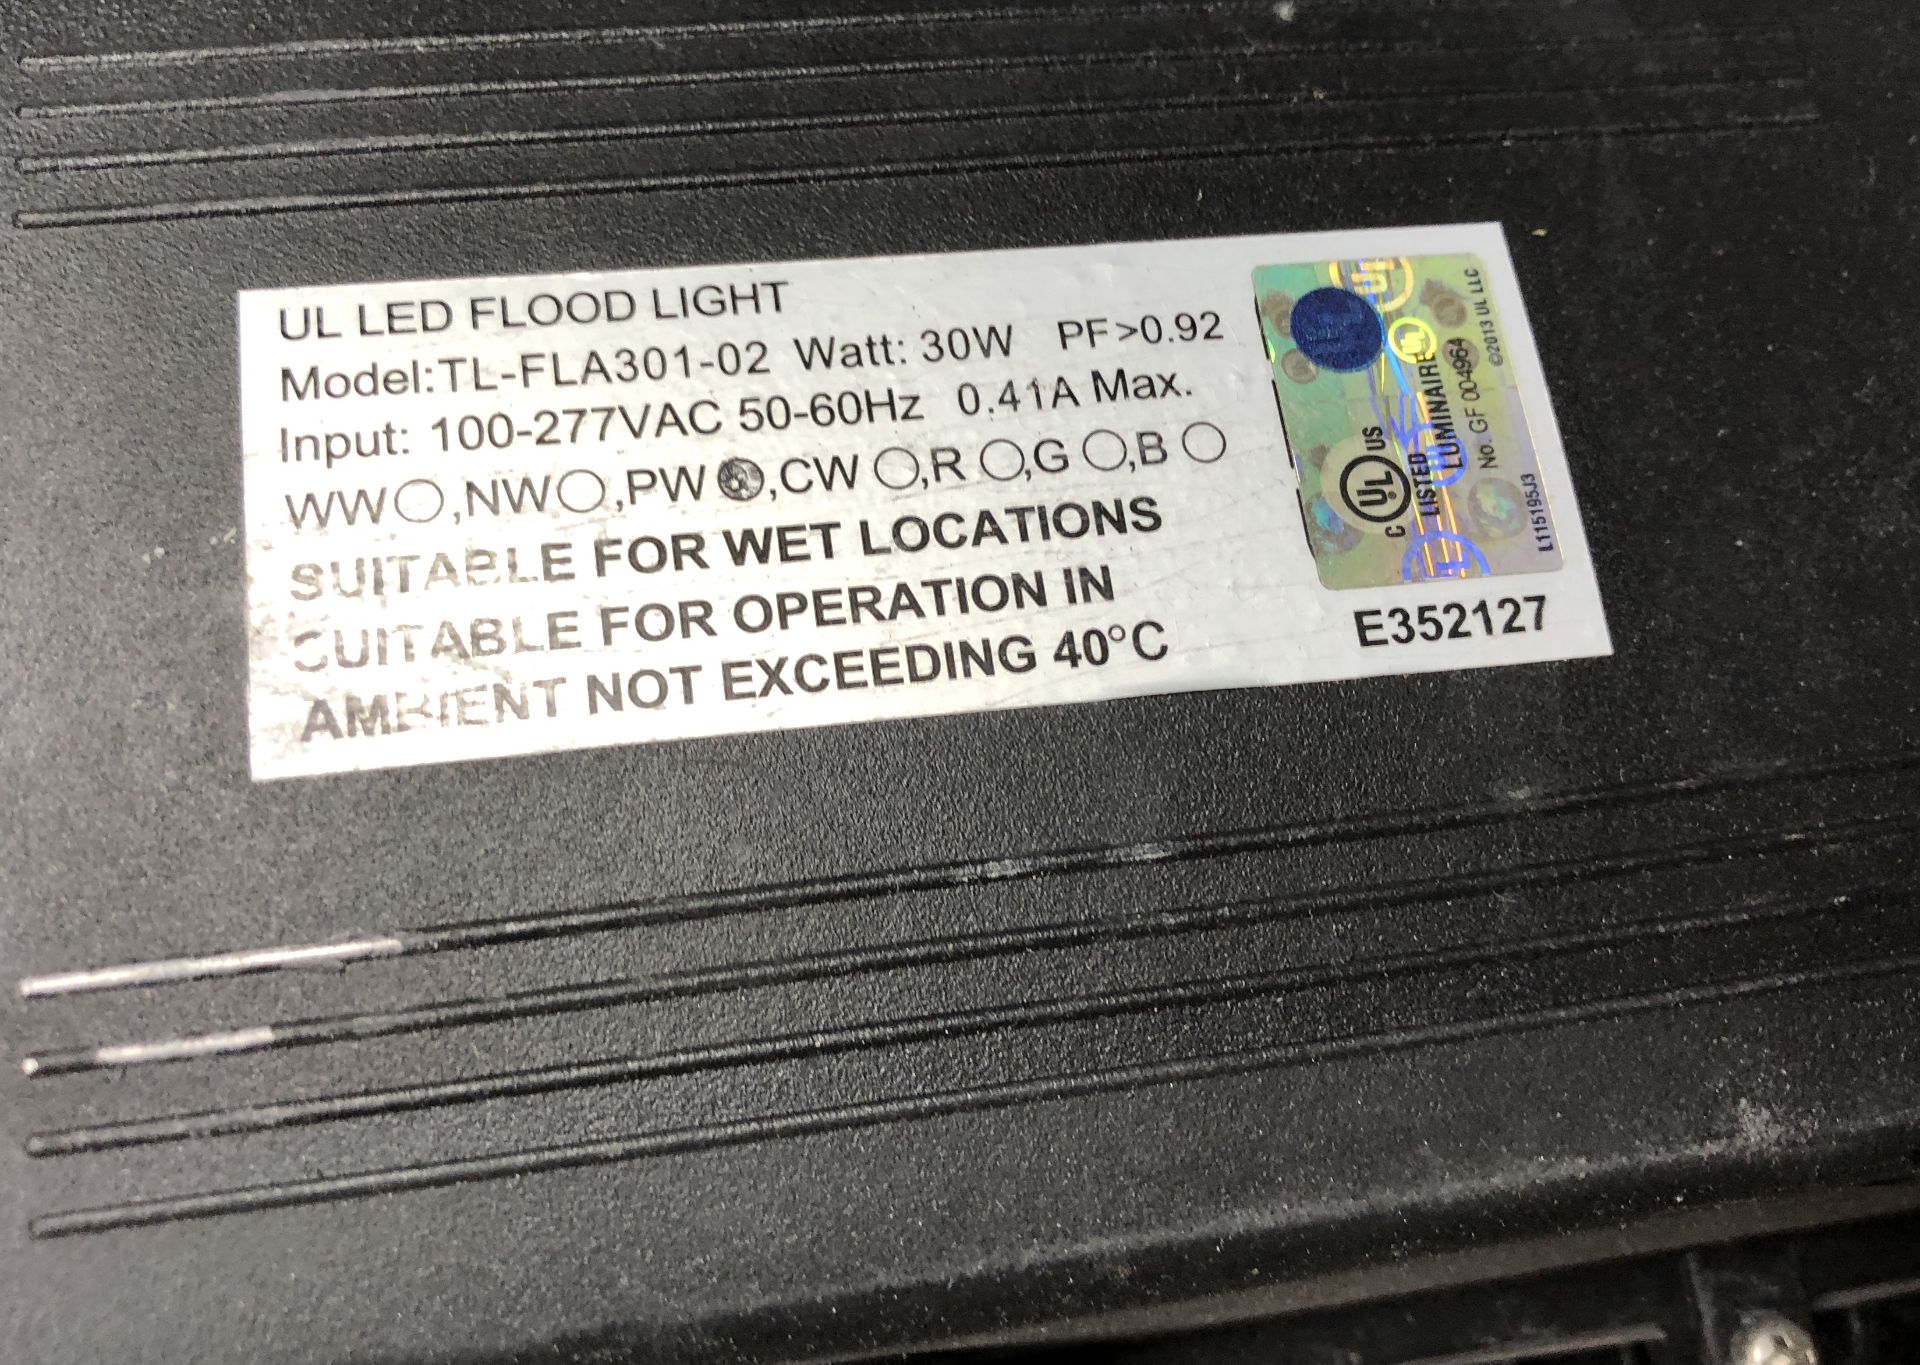 7 UL LED FLOOD LIGHTS WITH WIRES MODEL TL-FLA301-02 30W - Image 3 of 3